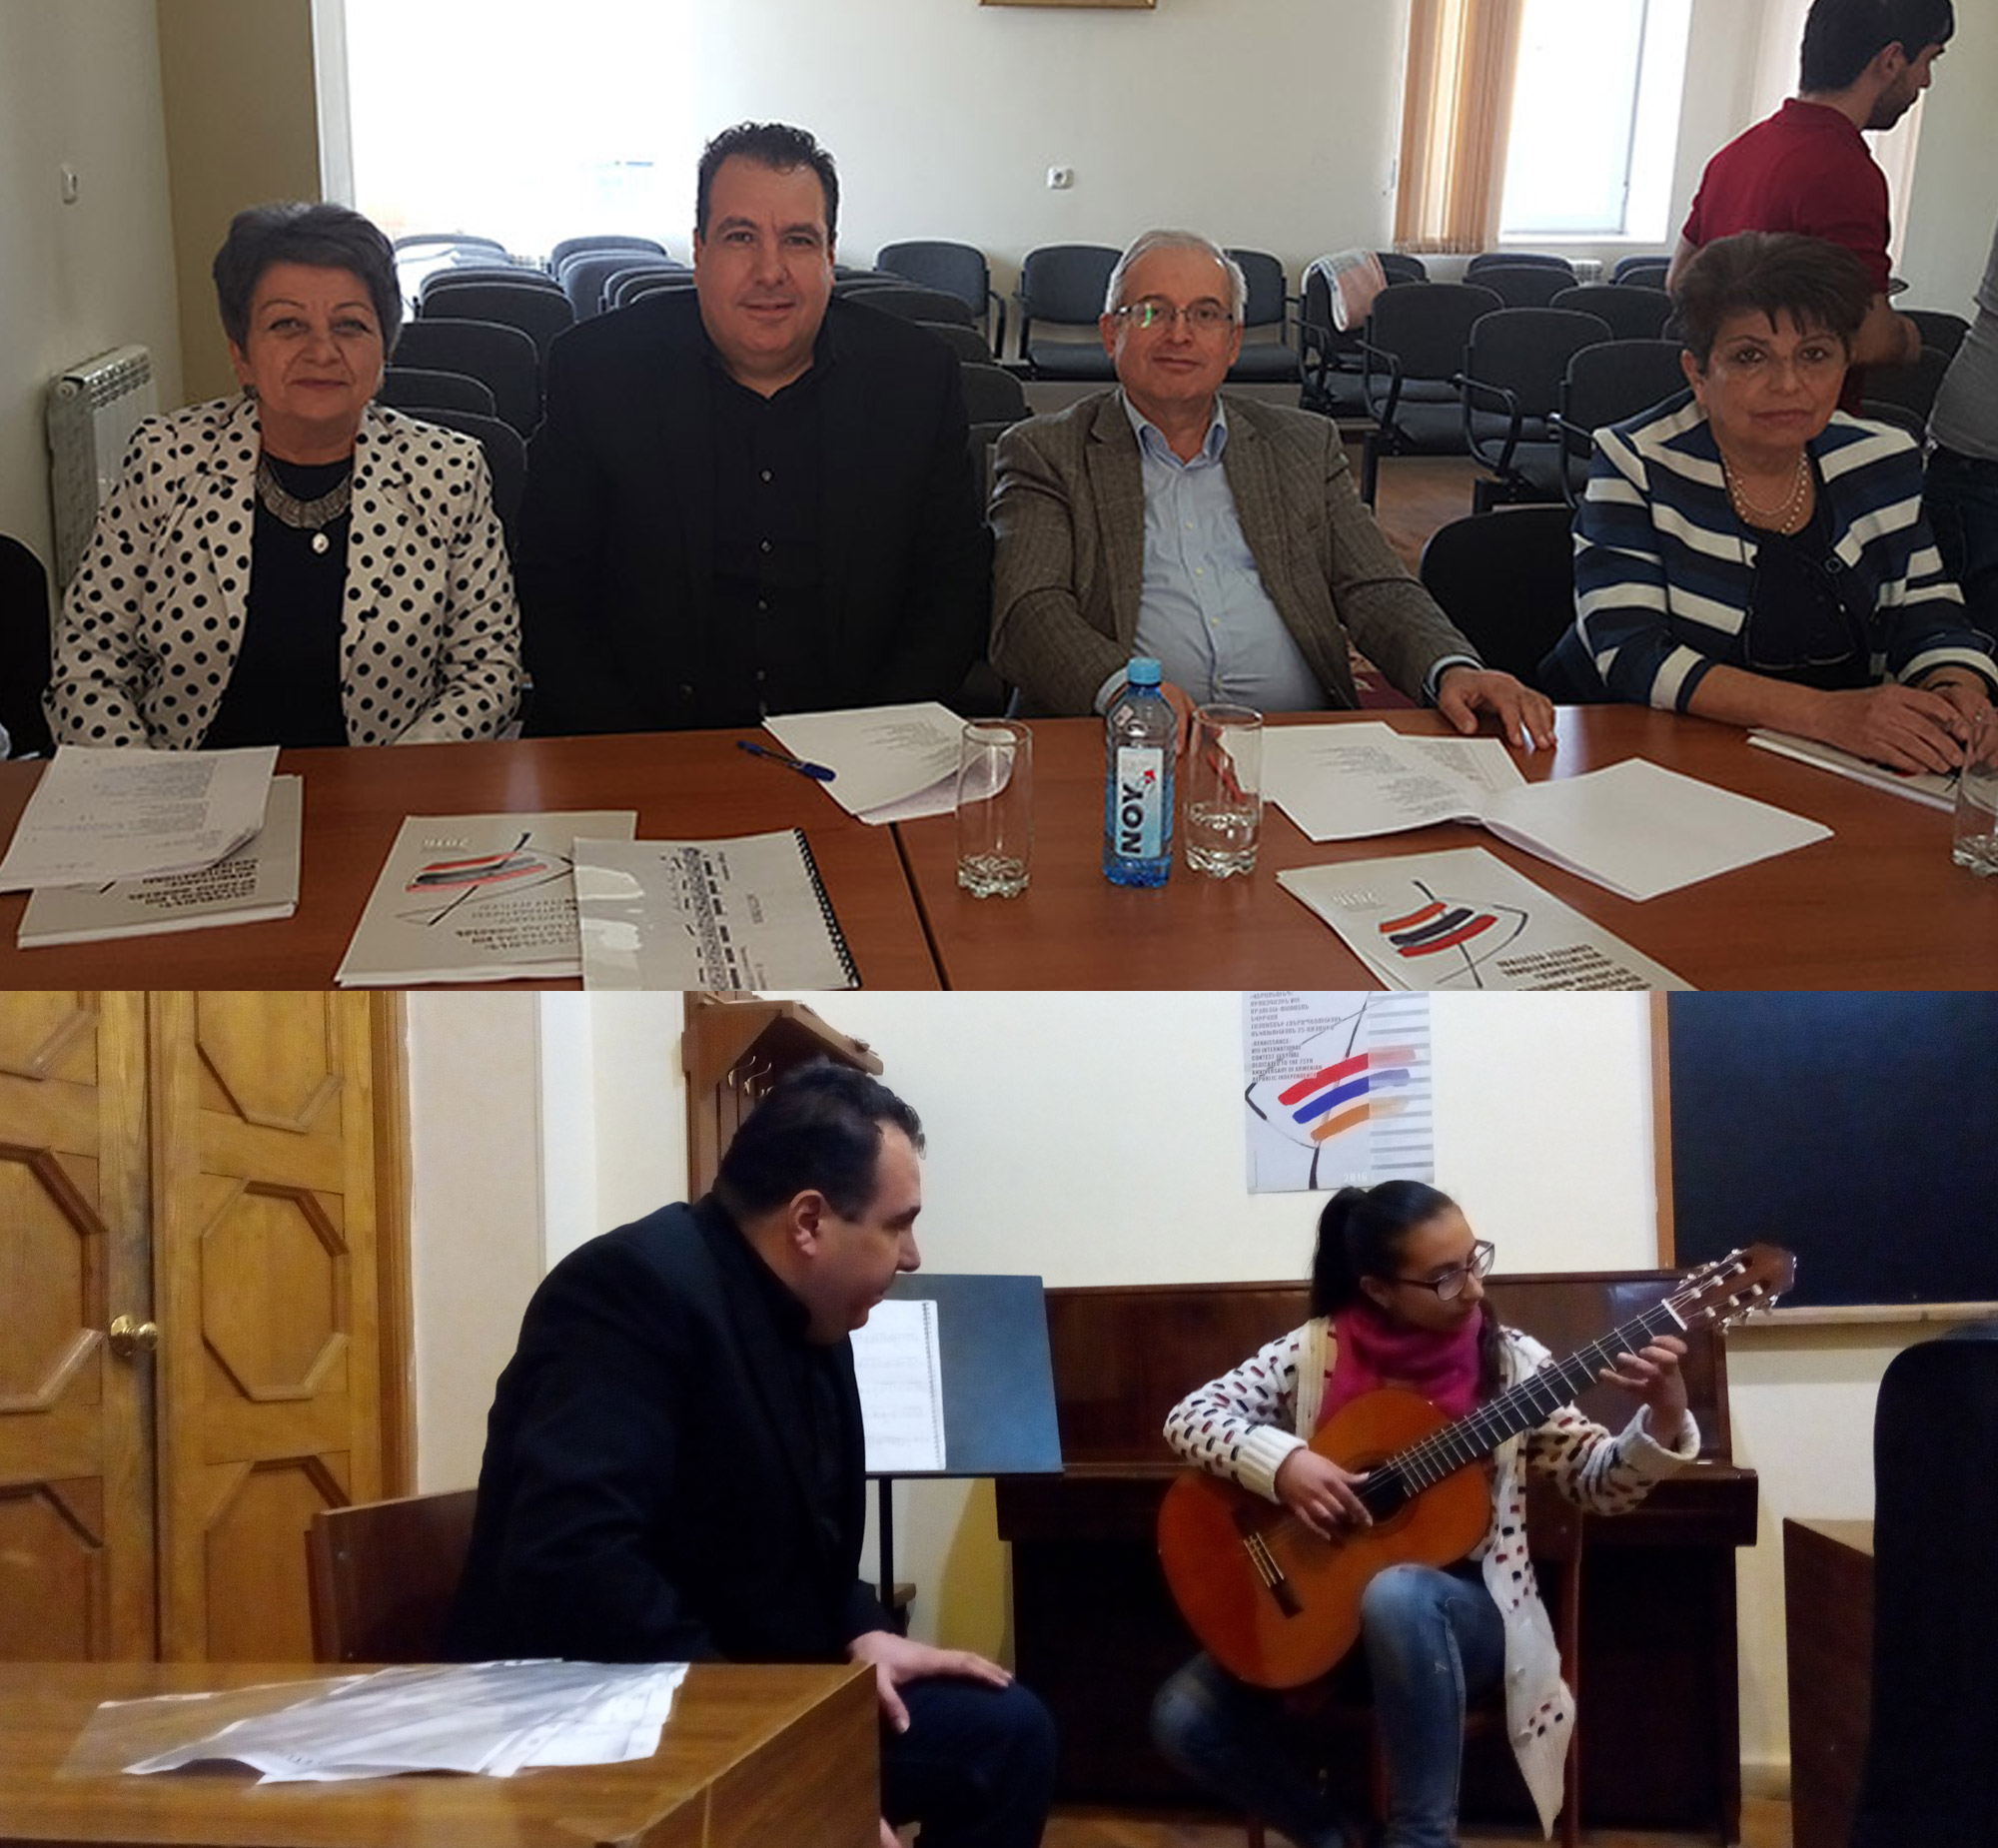 Megerdich Mikayelian was invited to The Famous Renaissance Festival as a jury member in Armenia. Mikayelian also gave guitar master class to the students there.